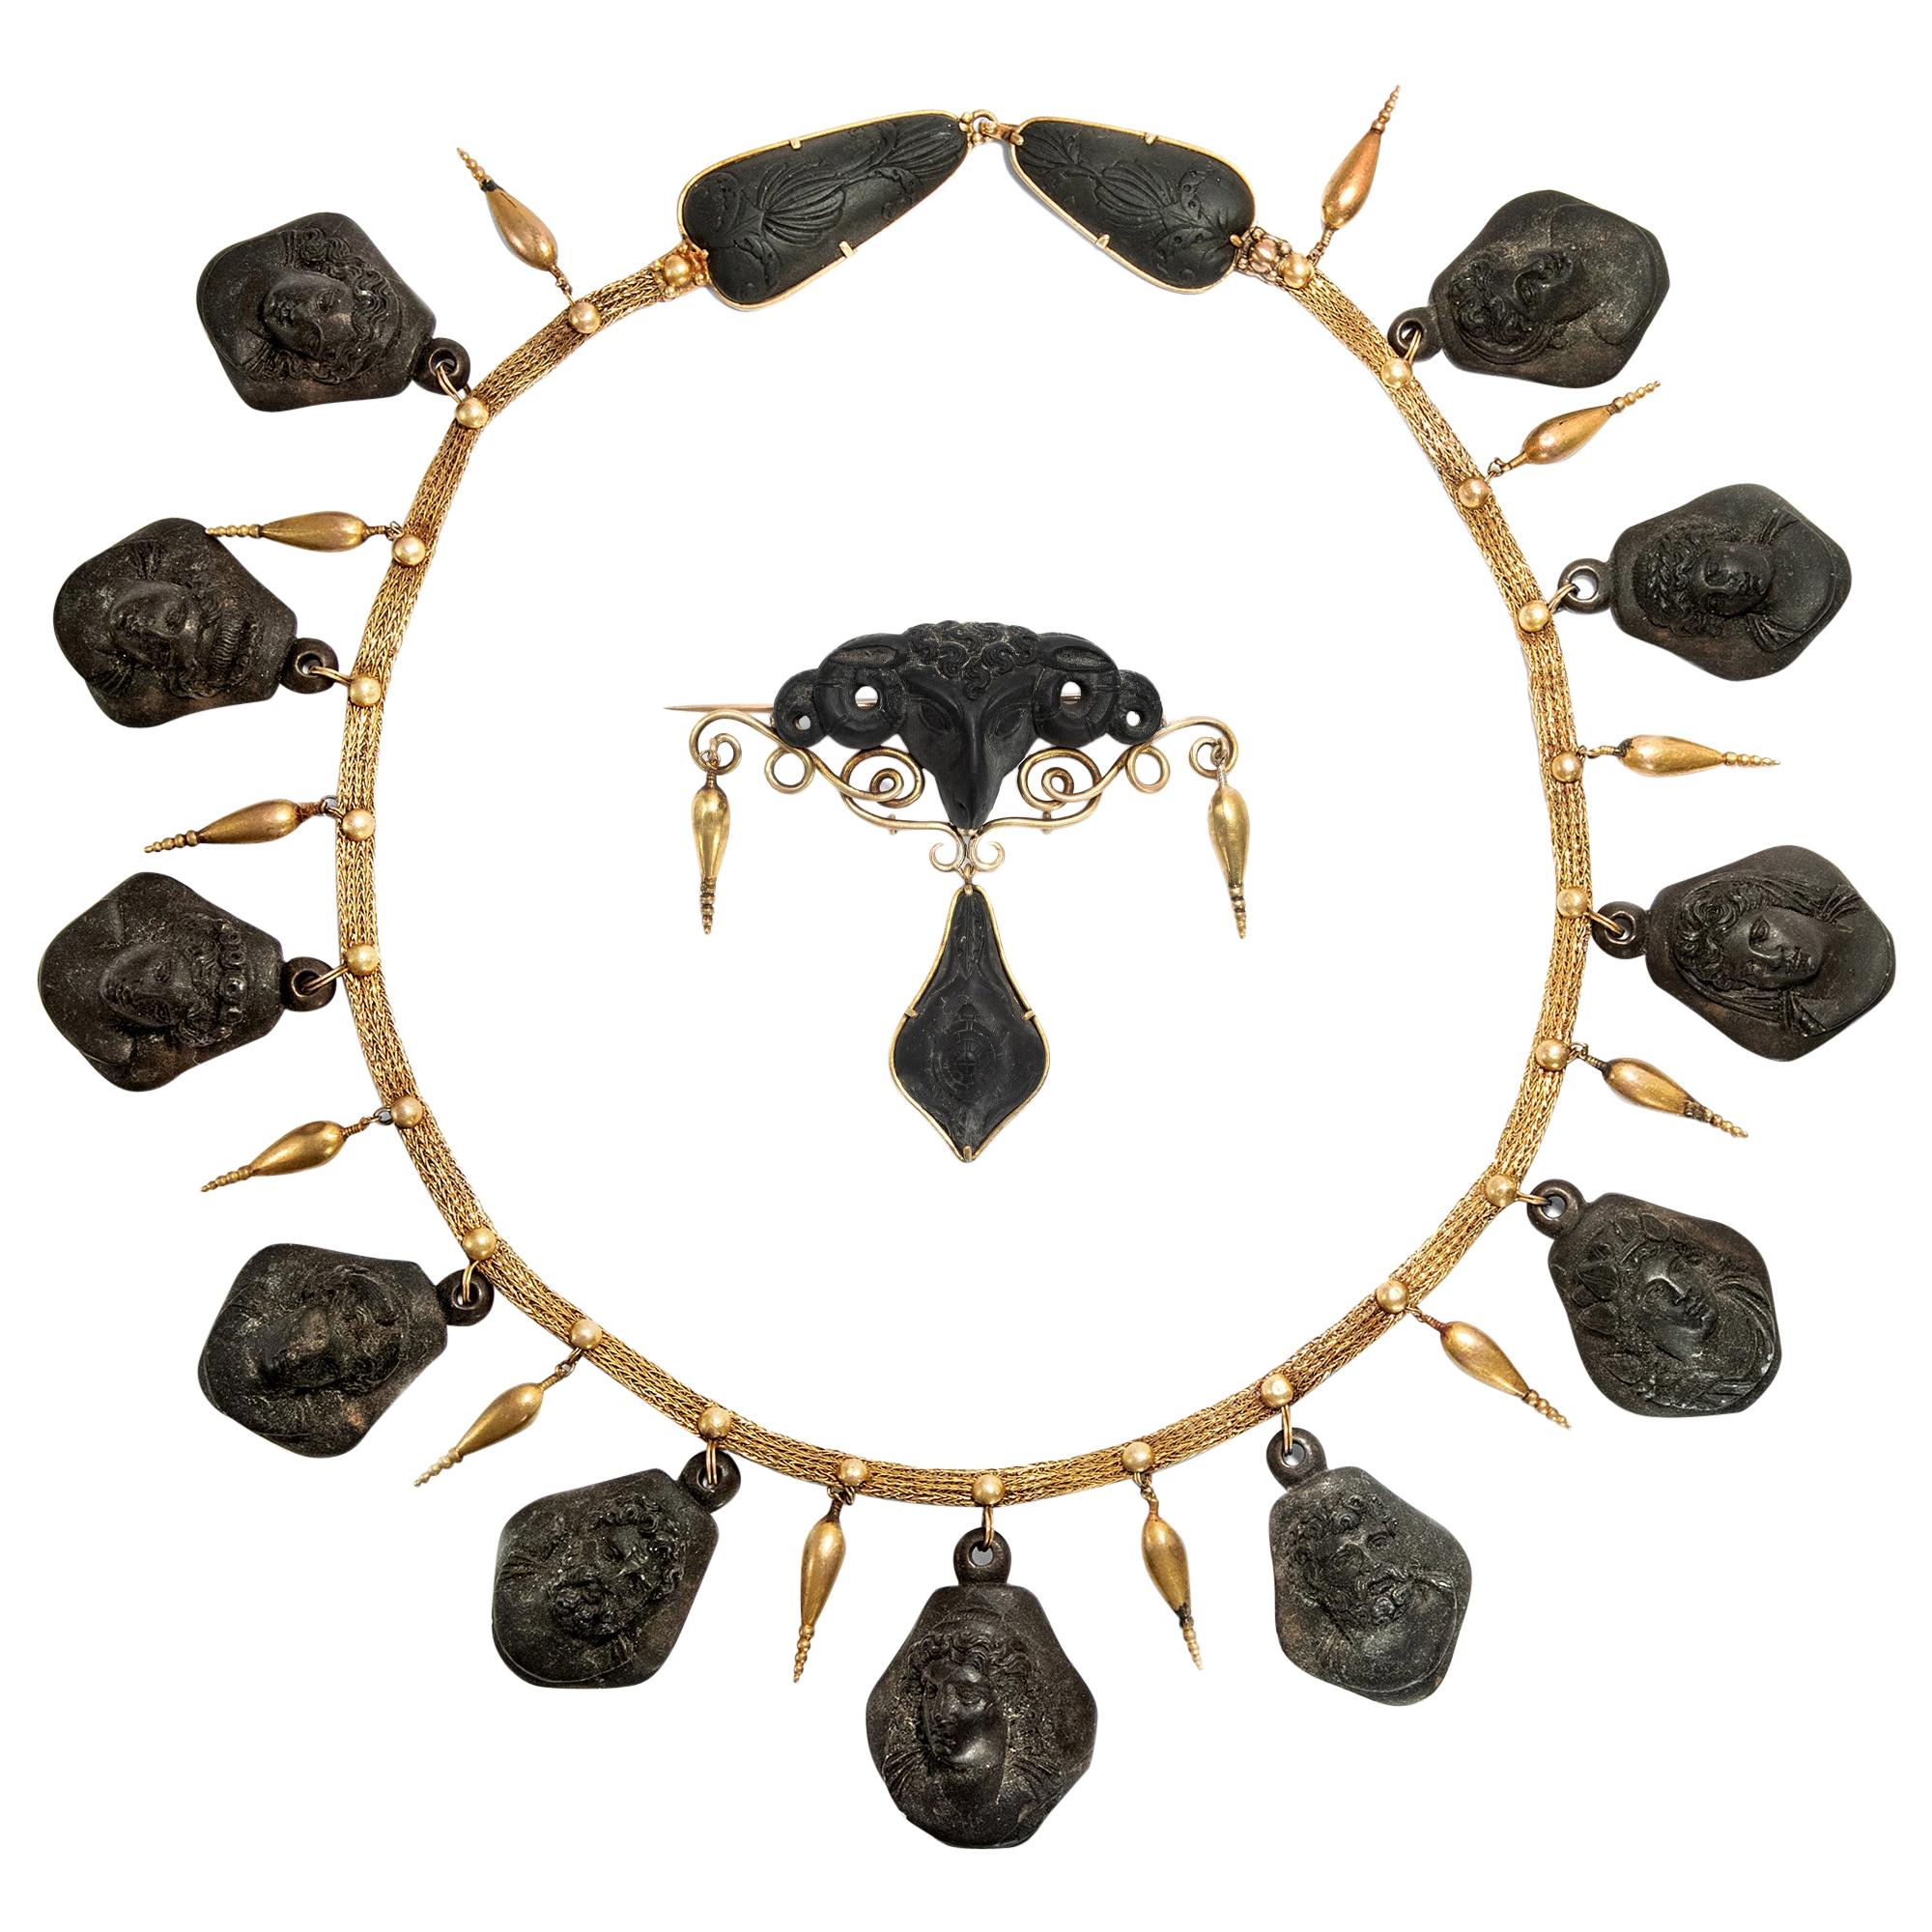 Castellani (Attr.) Etruscan Necklace and Brooch, Lava & Gold, Italy, circa 1850